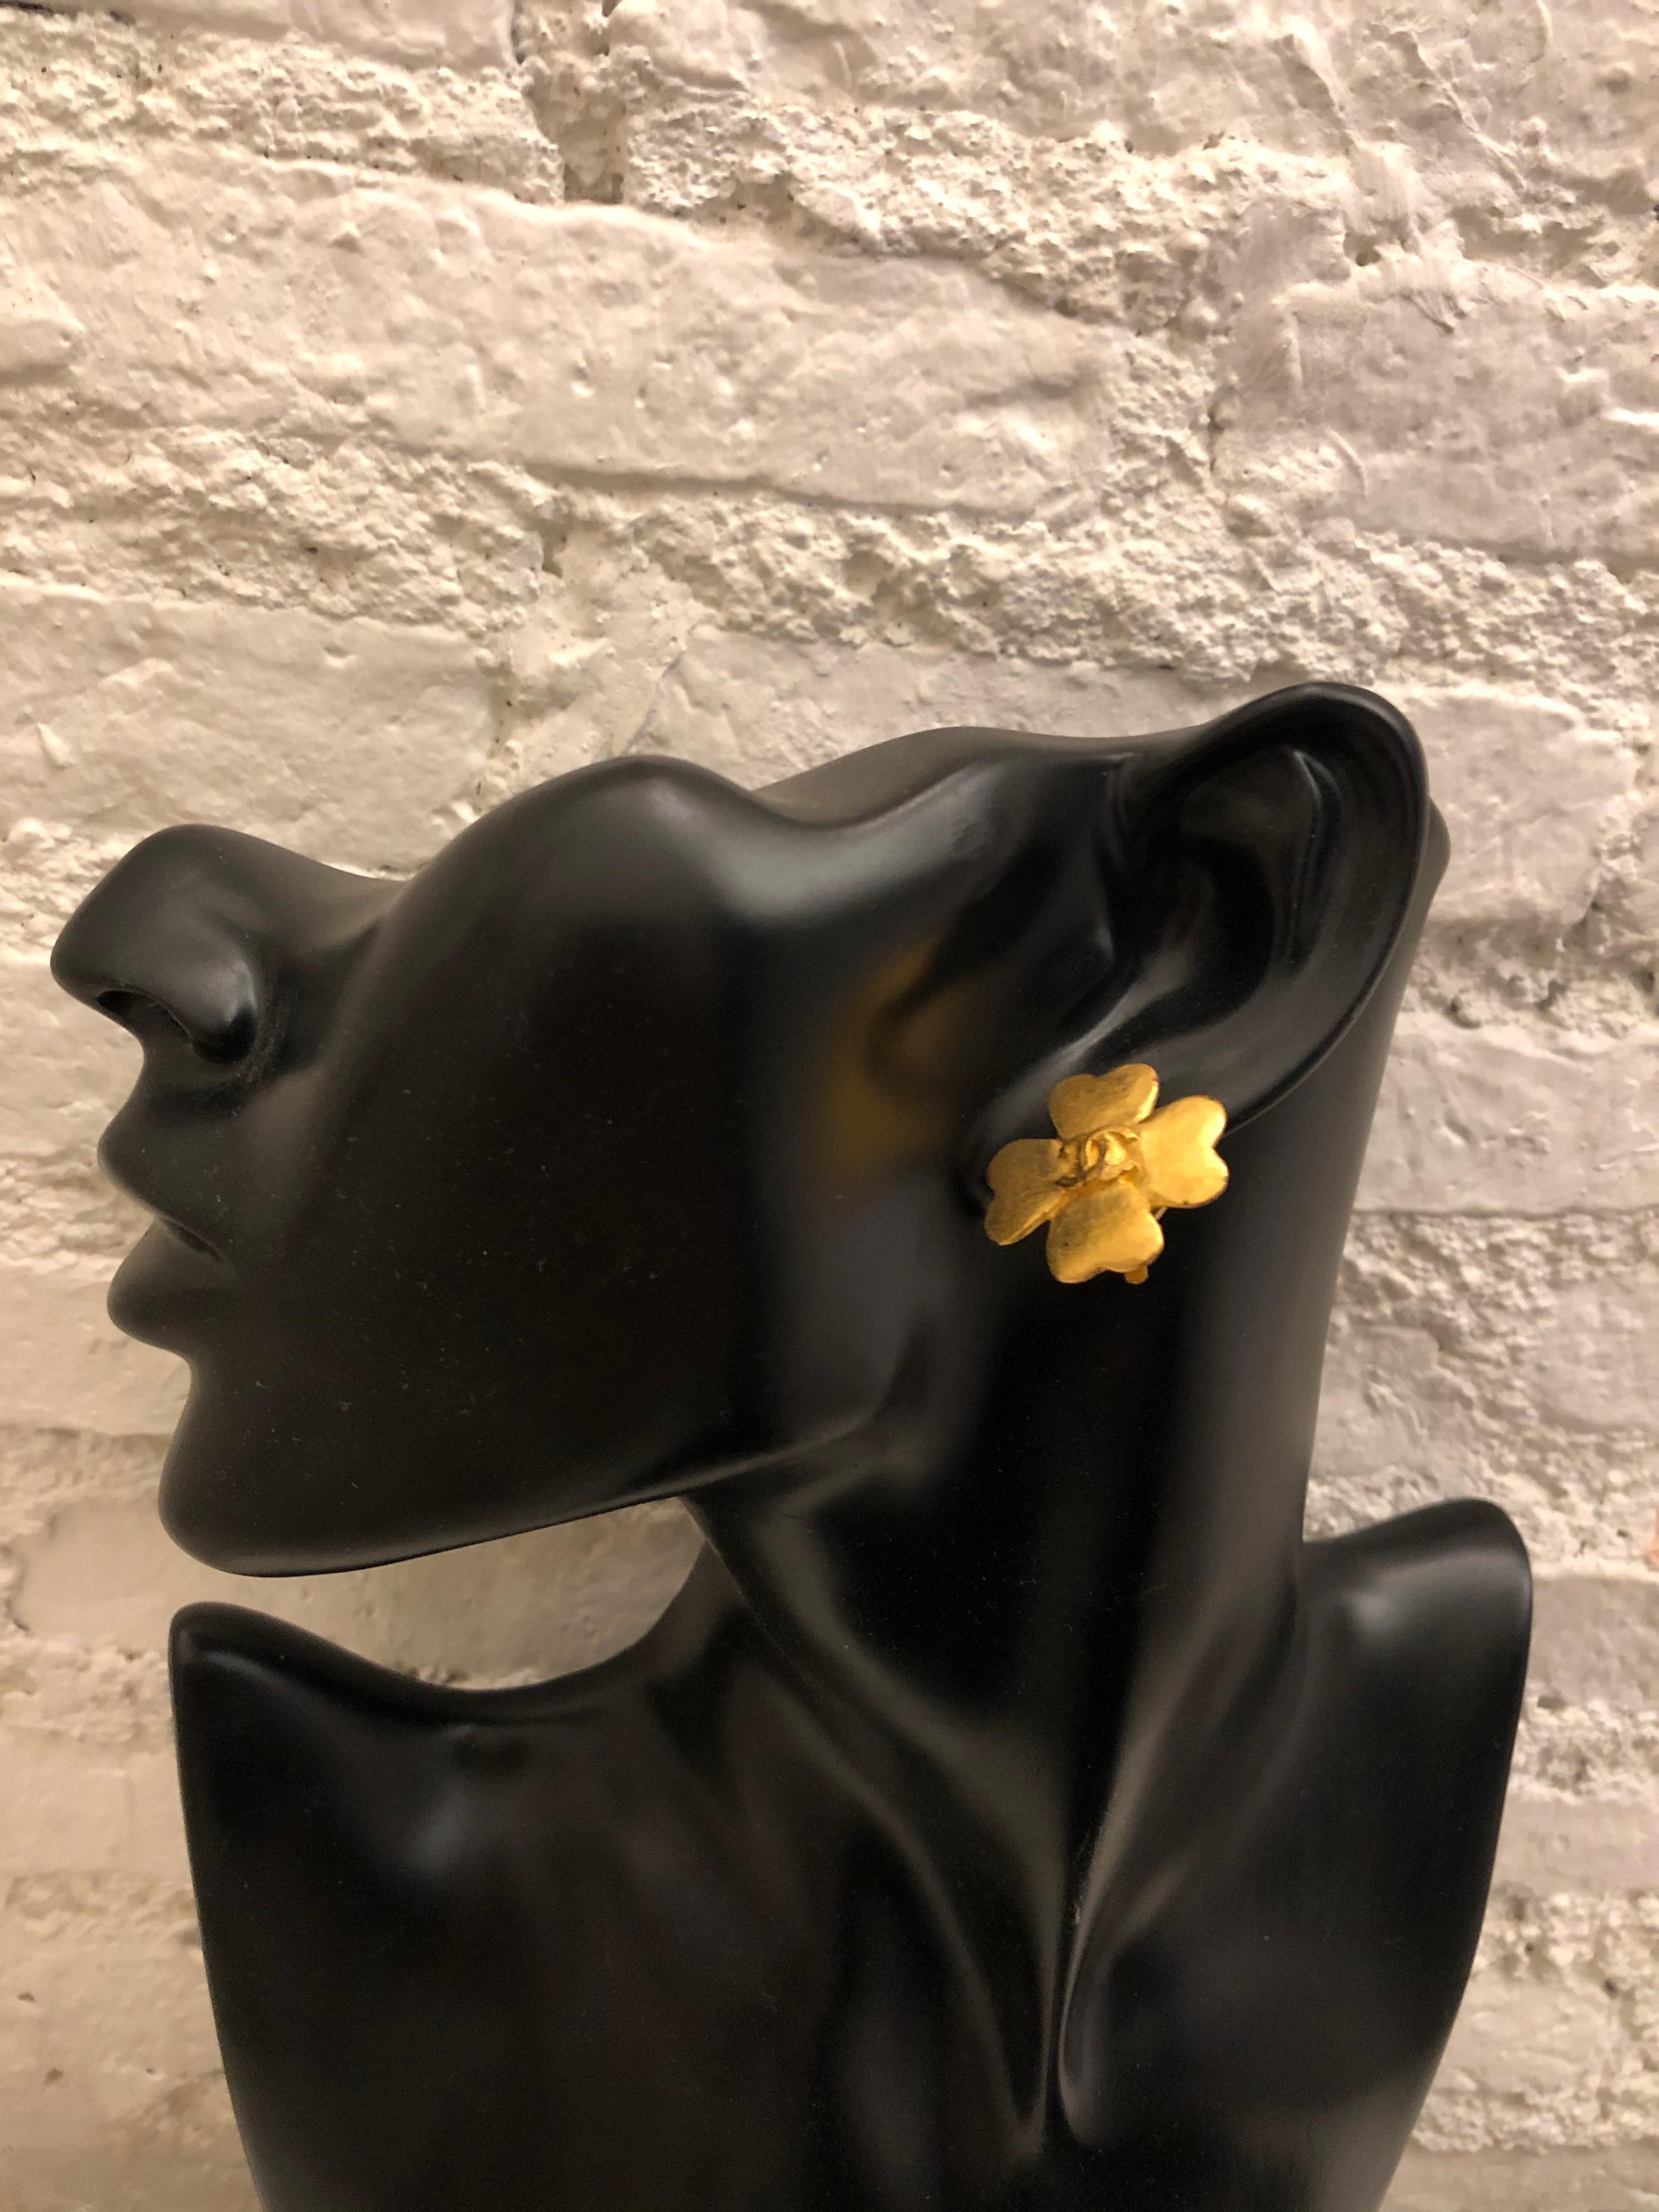 1990s CHANEL gold toned clover leaf clip-on earrings adorned with a CC logo. Stamped CHANEL 95P made in France. Diameter measures approximately 2.3 cm. Come with box. 

Condition - Minor scratches. Generally in good condition.